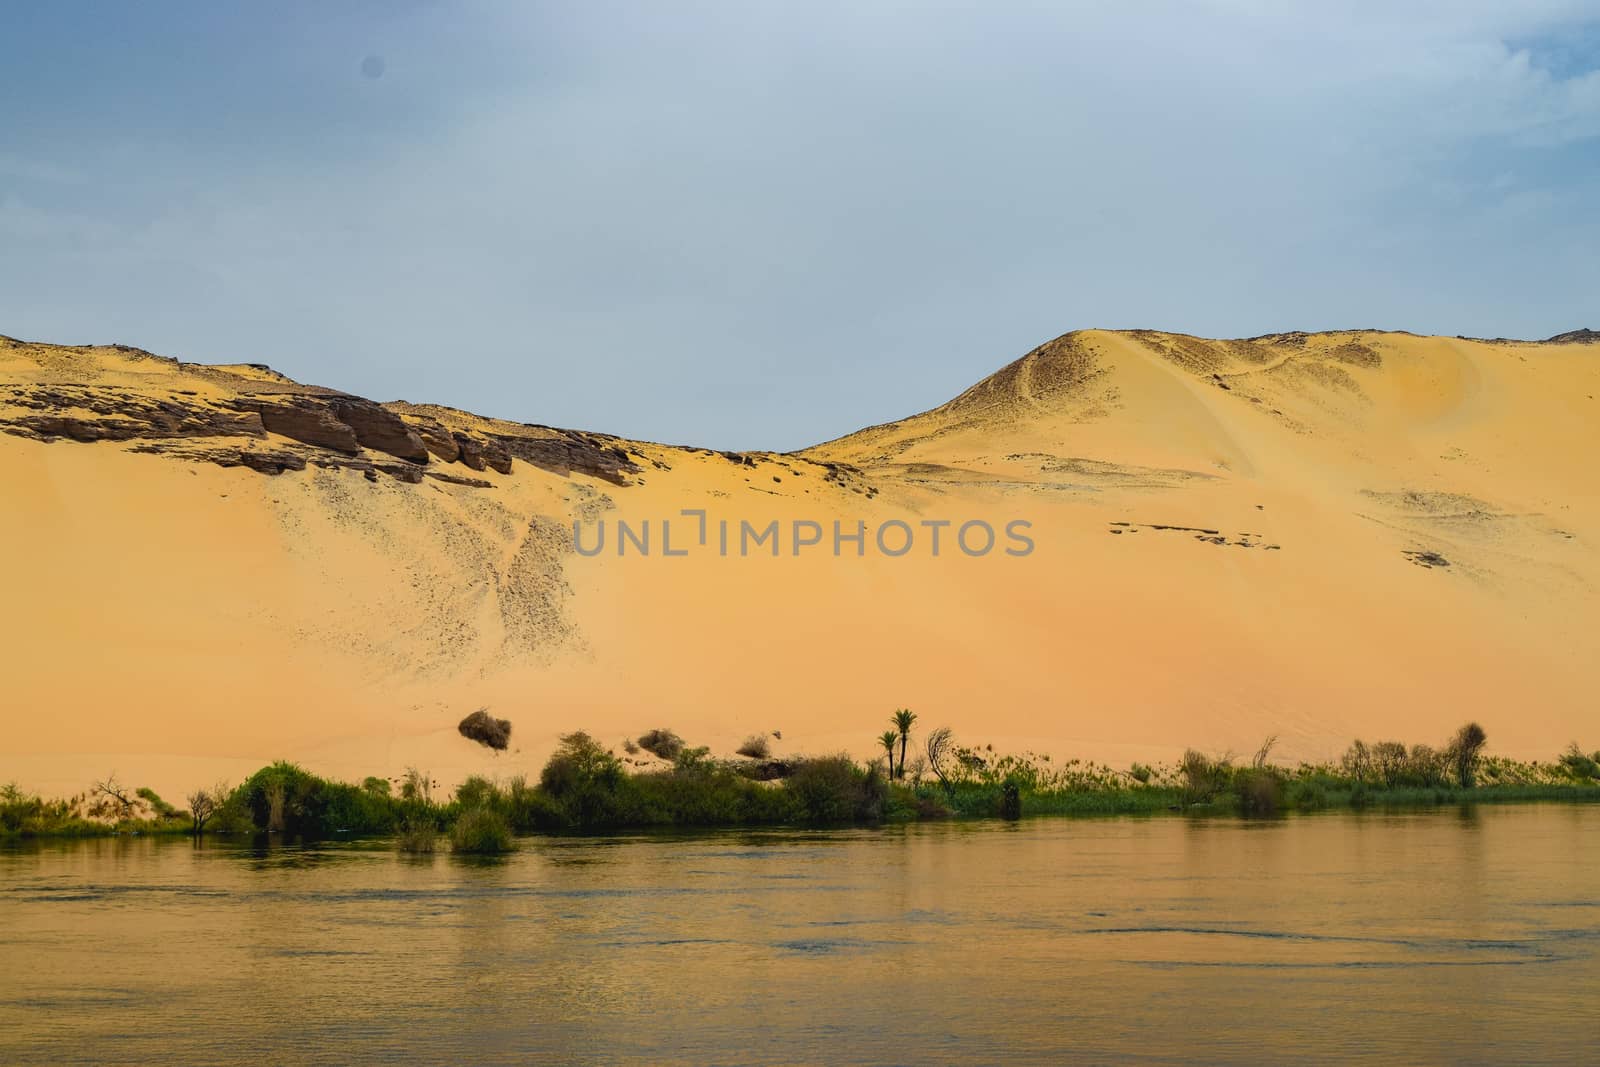 Sand Dunes On the Edge of The River Nile in Aswan Egypt